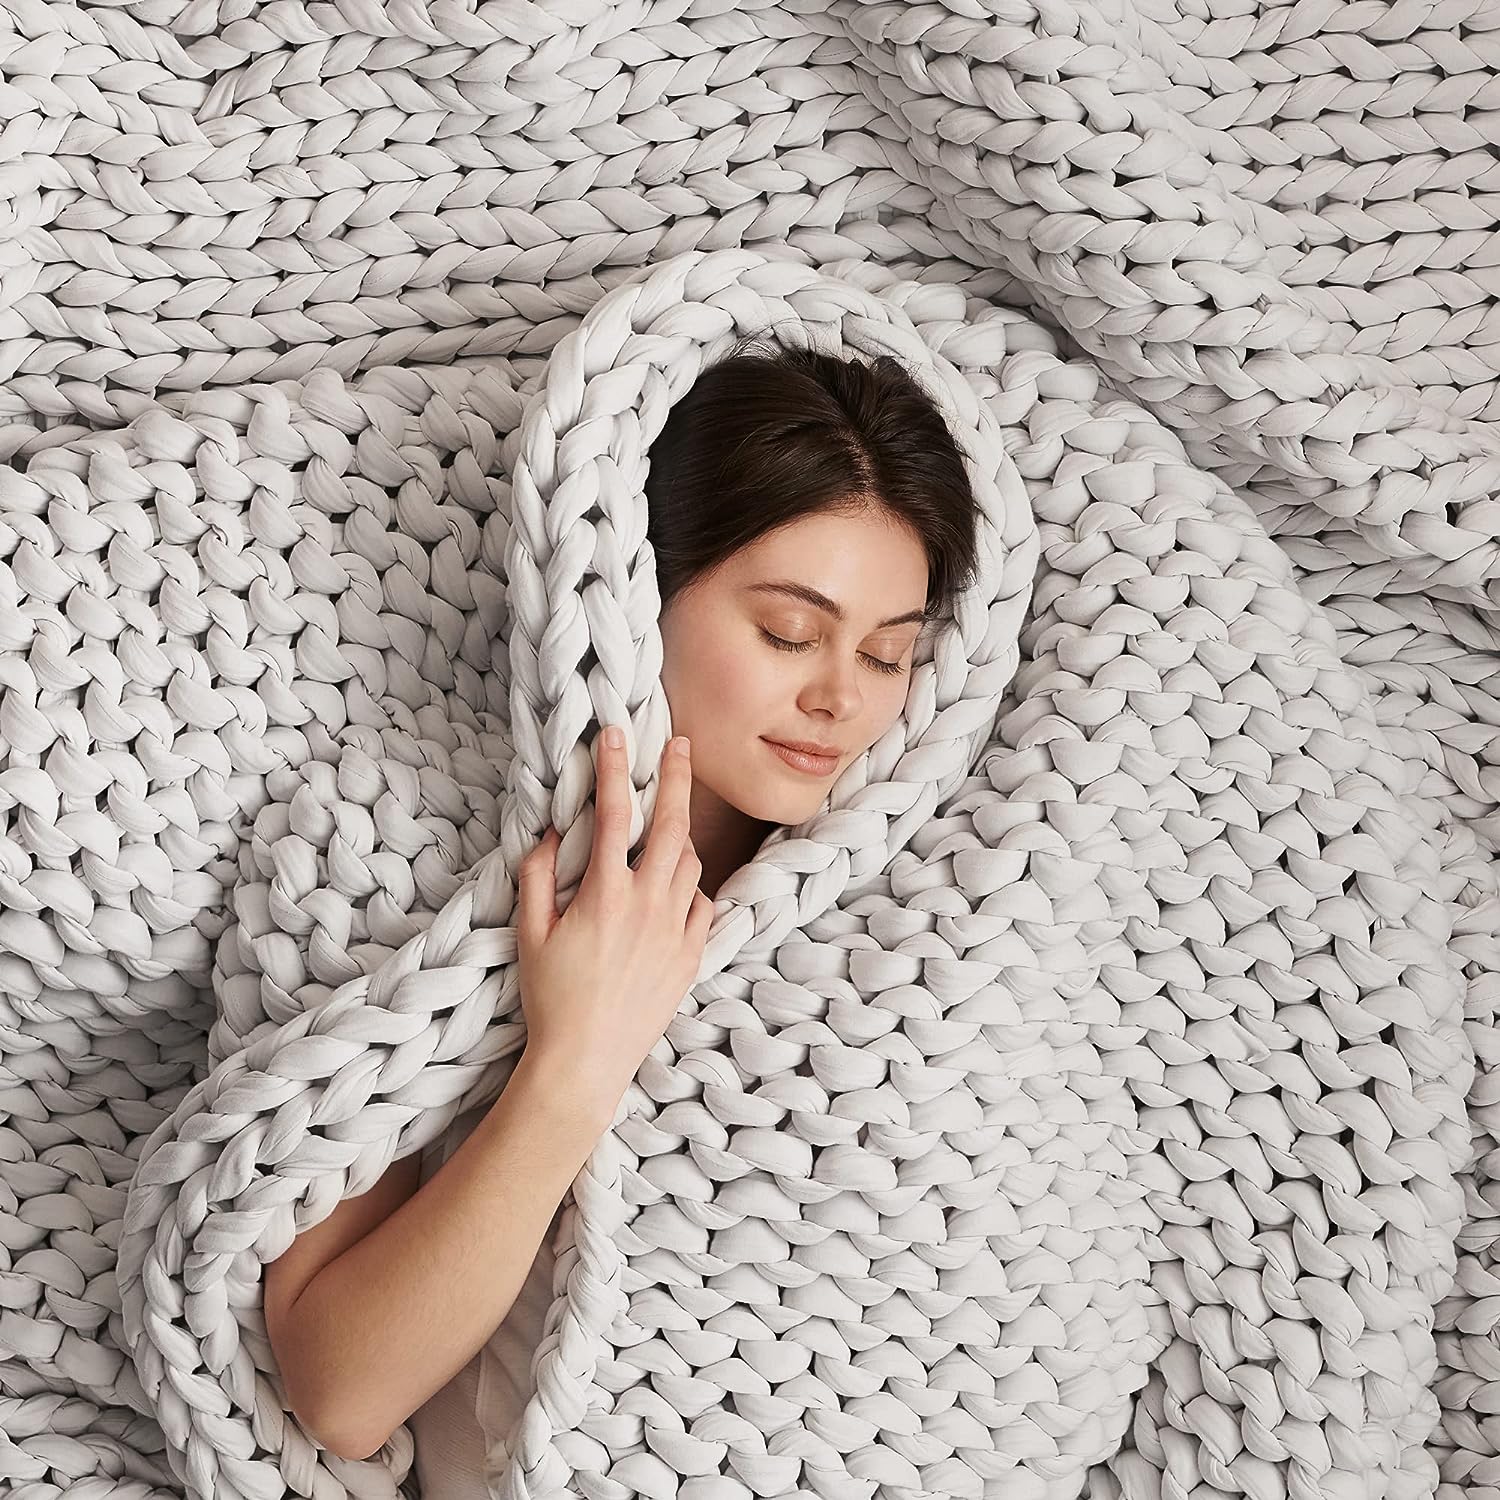 Bearaby Weighted Blanket Review – Does It Work?